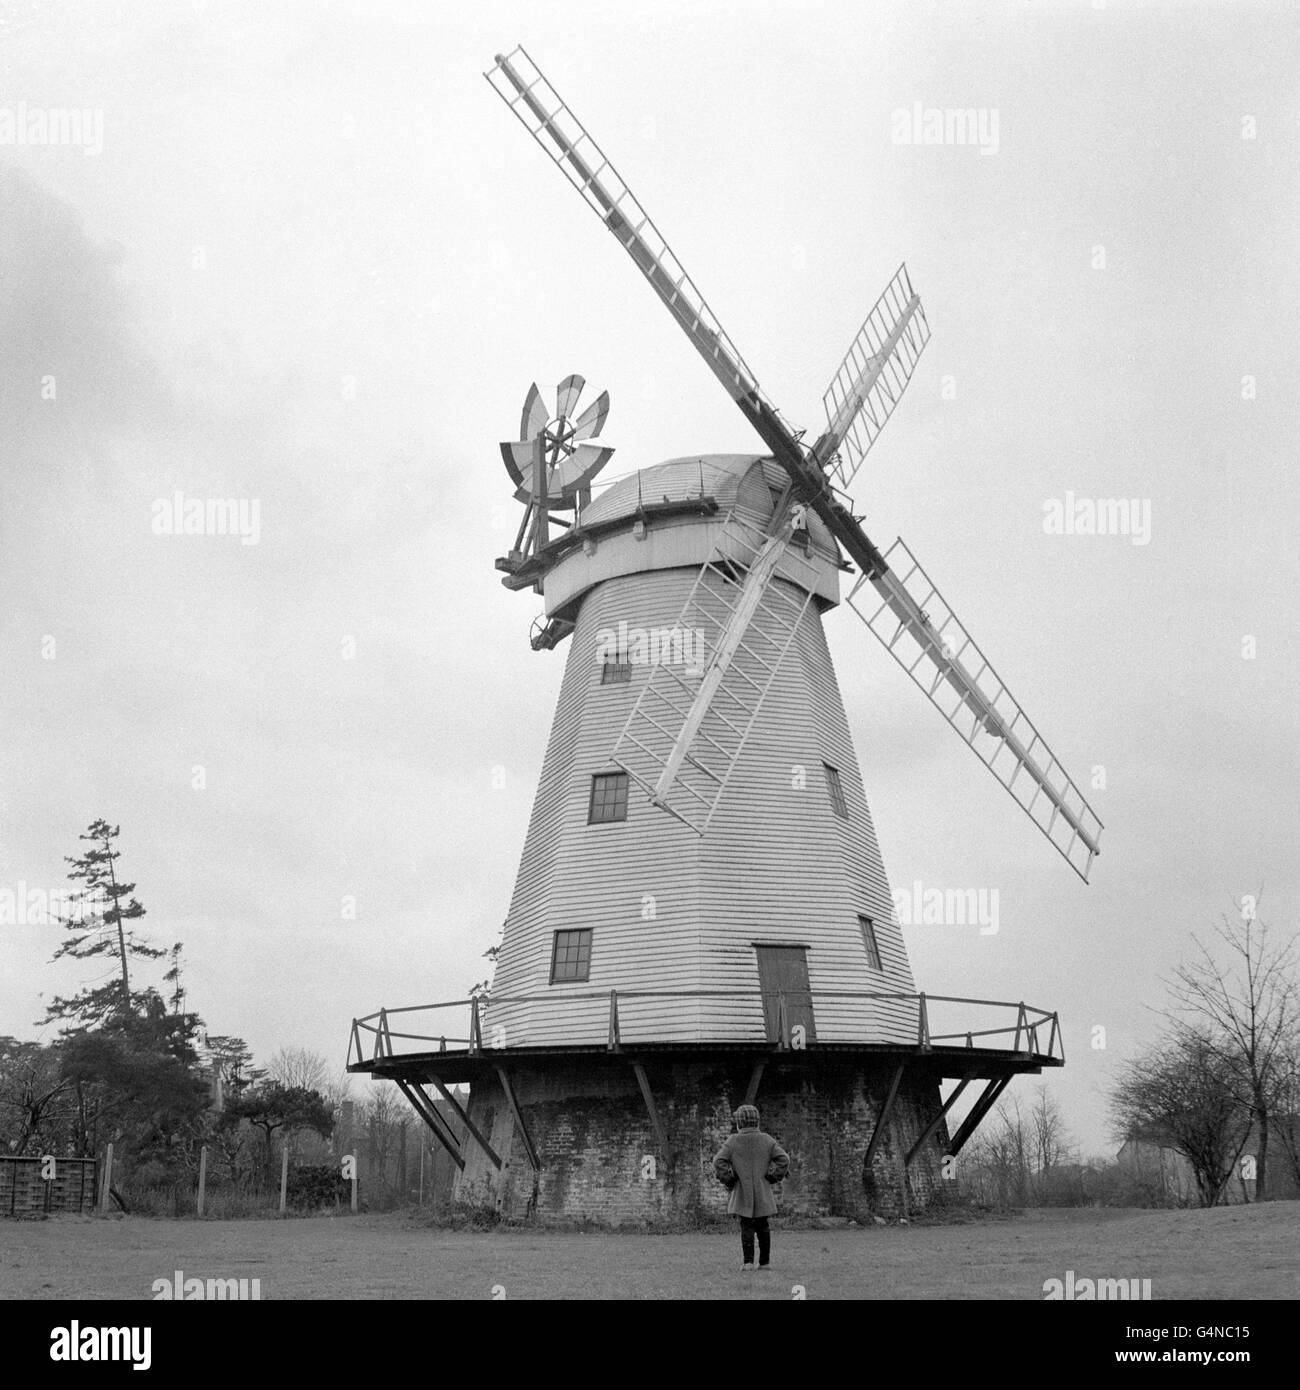 Time stands still for this giant windmill at St Mary's Lane, Upminster, Essex. It often stops the traffic to the coast as motorists stop to admire it. Built inn 1802 by James Nokes, the windmill used a steam engine powerful enough to work five pairs of stones. Young Robert Stolworthy of Romford, Essex, stands and admires this giant from the past, which is no longer used as a corn-mill. Stock Photo